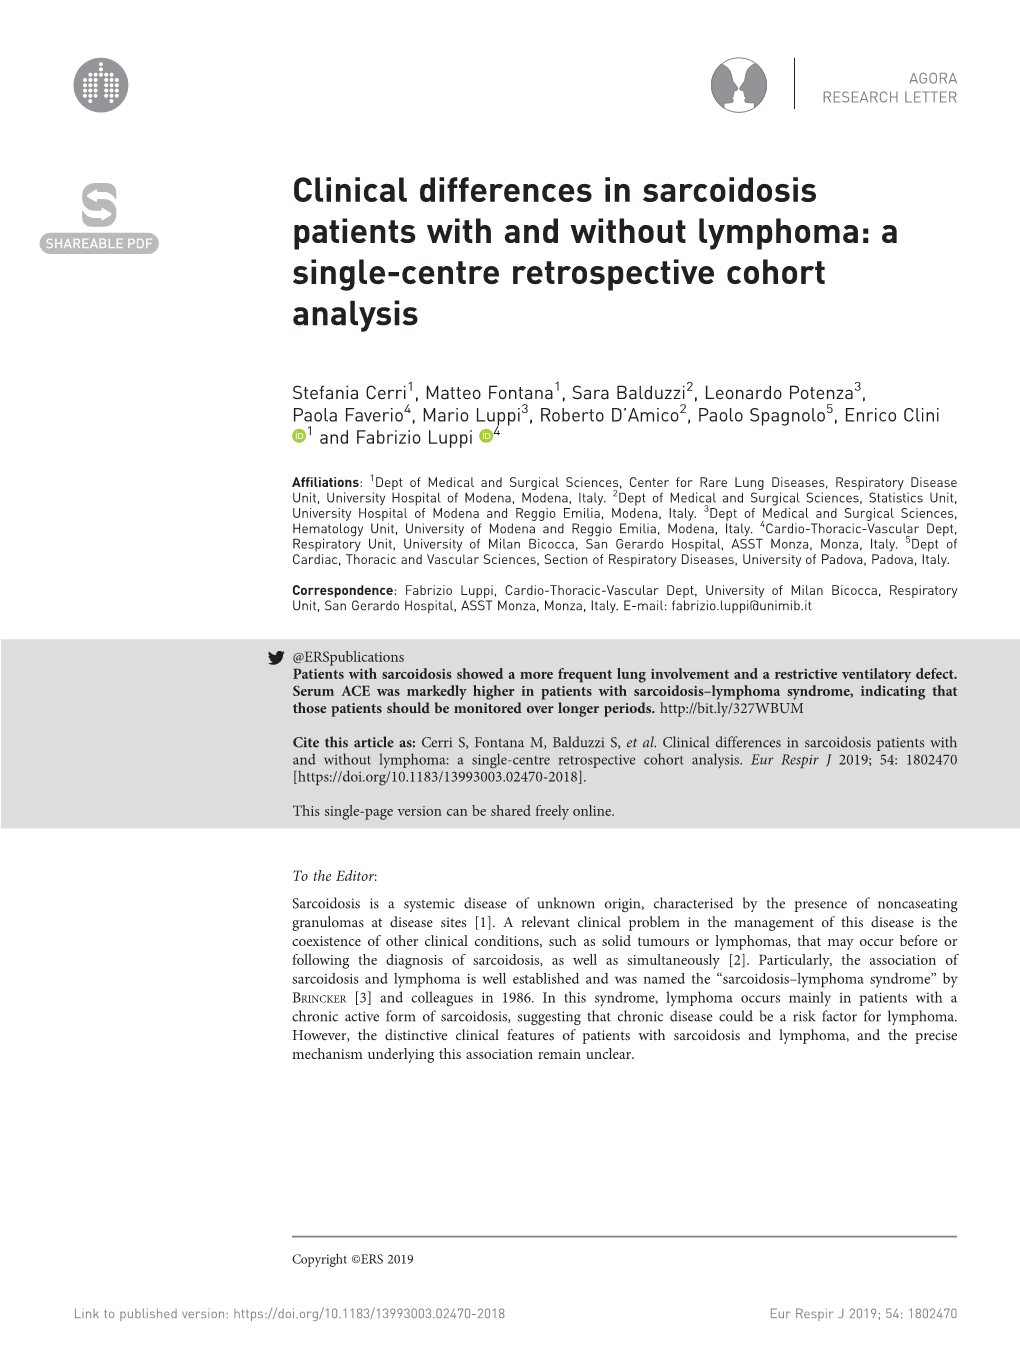 Clinical Differences in Sarcoidosis Patients with and Without Lymphoma: a Single-Centre Retrospective Cohort Analysis